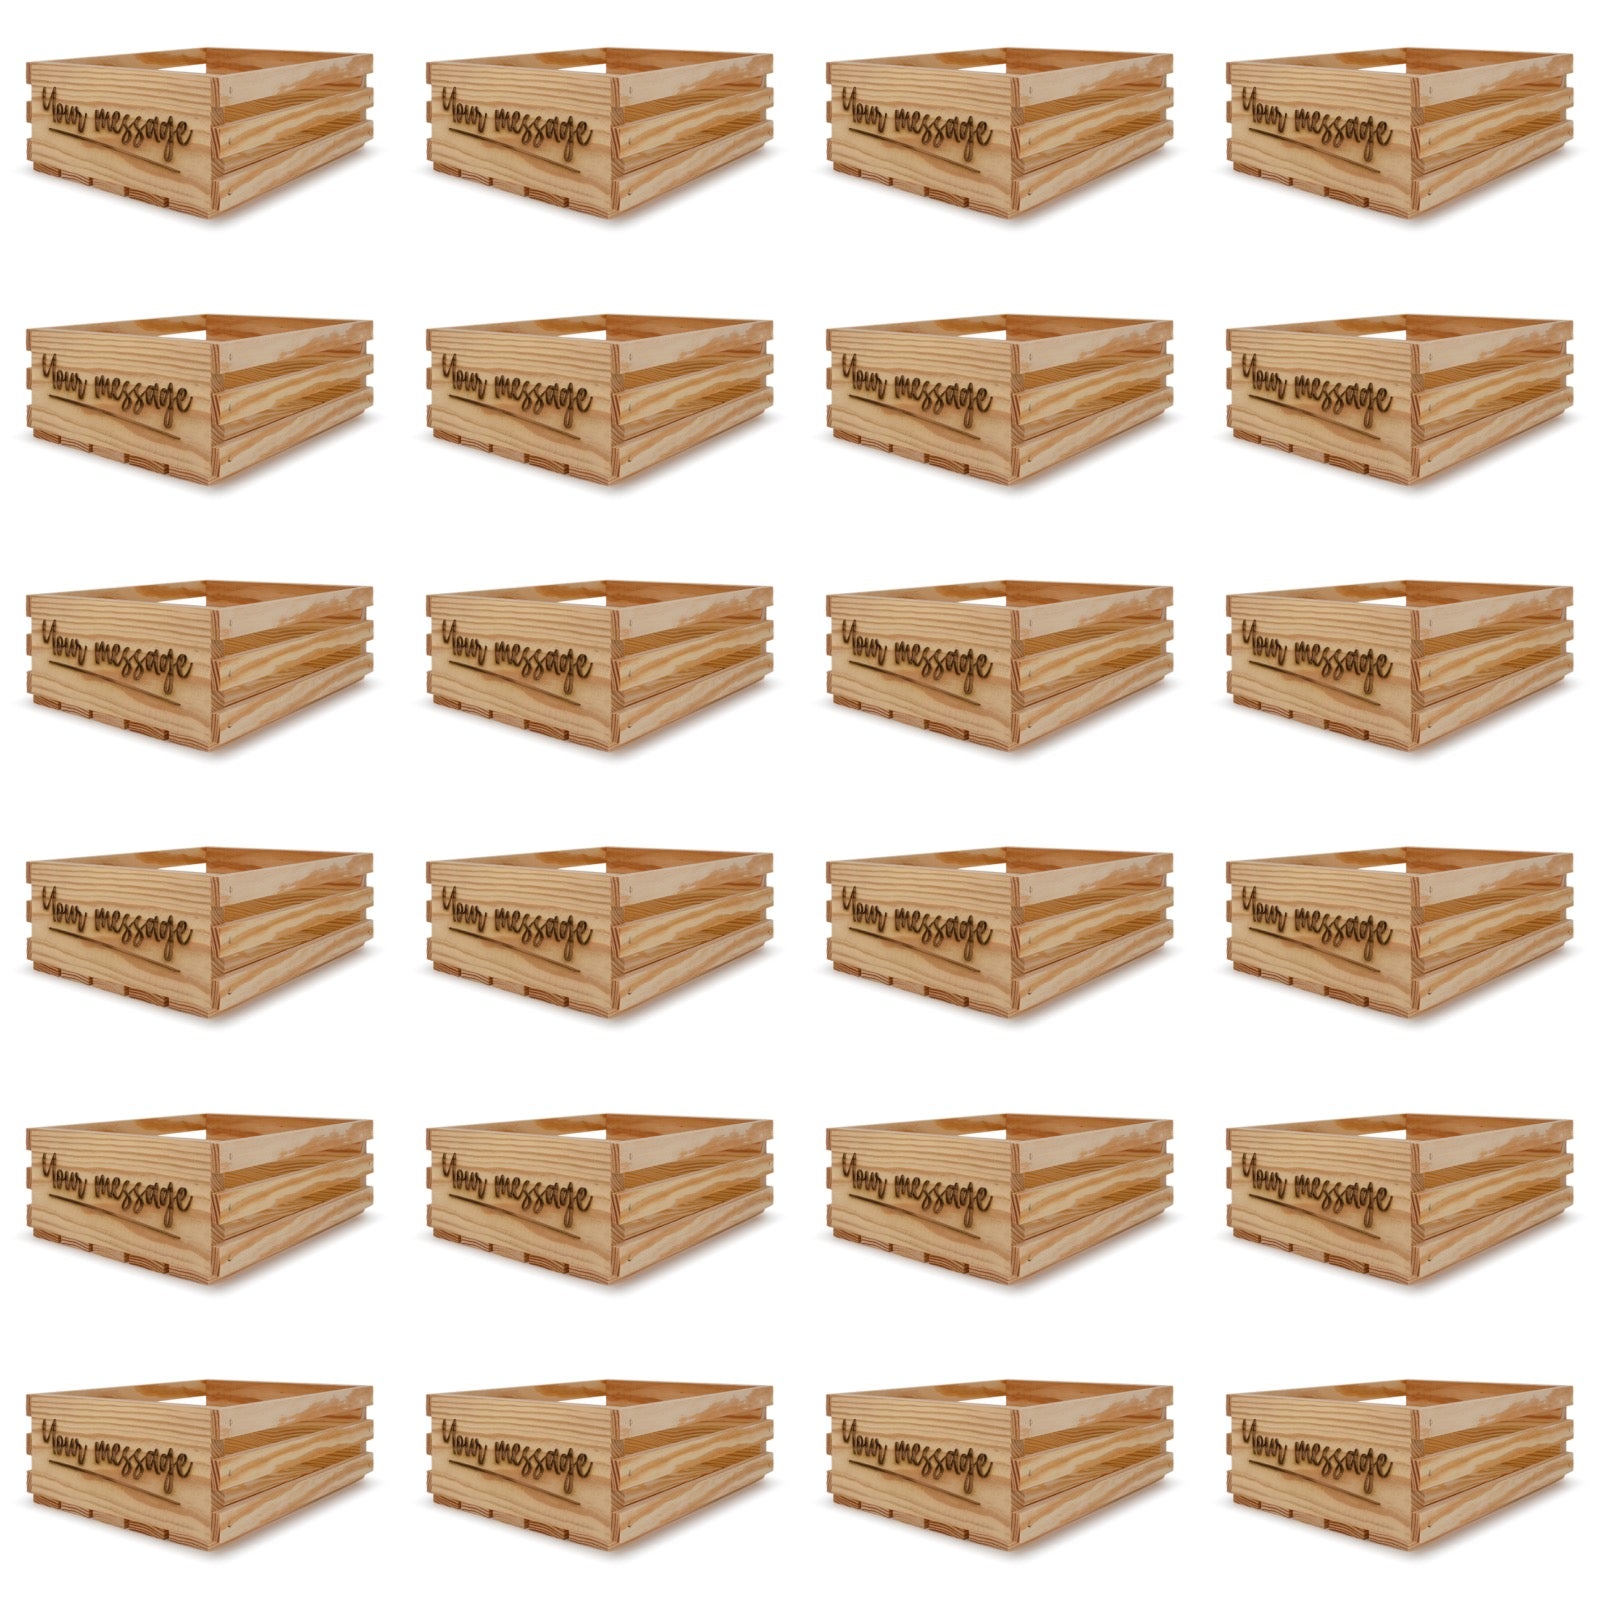 24 Small wooden crates 12x10x4.5 your message included